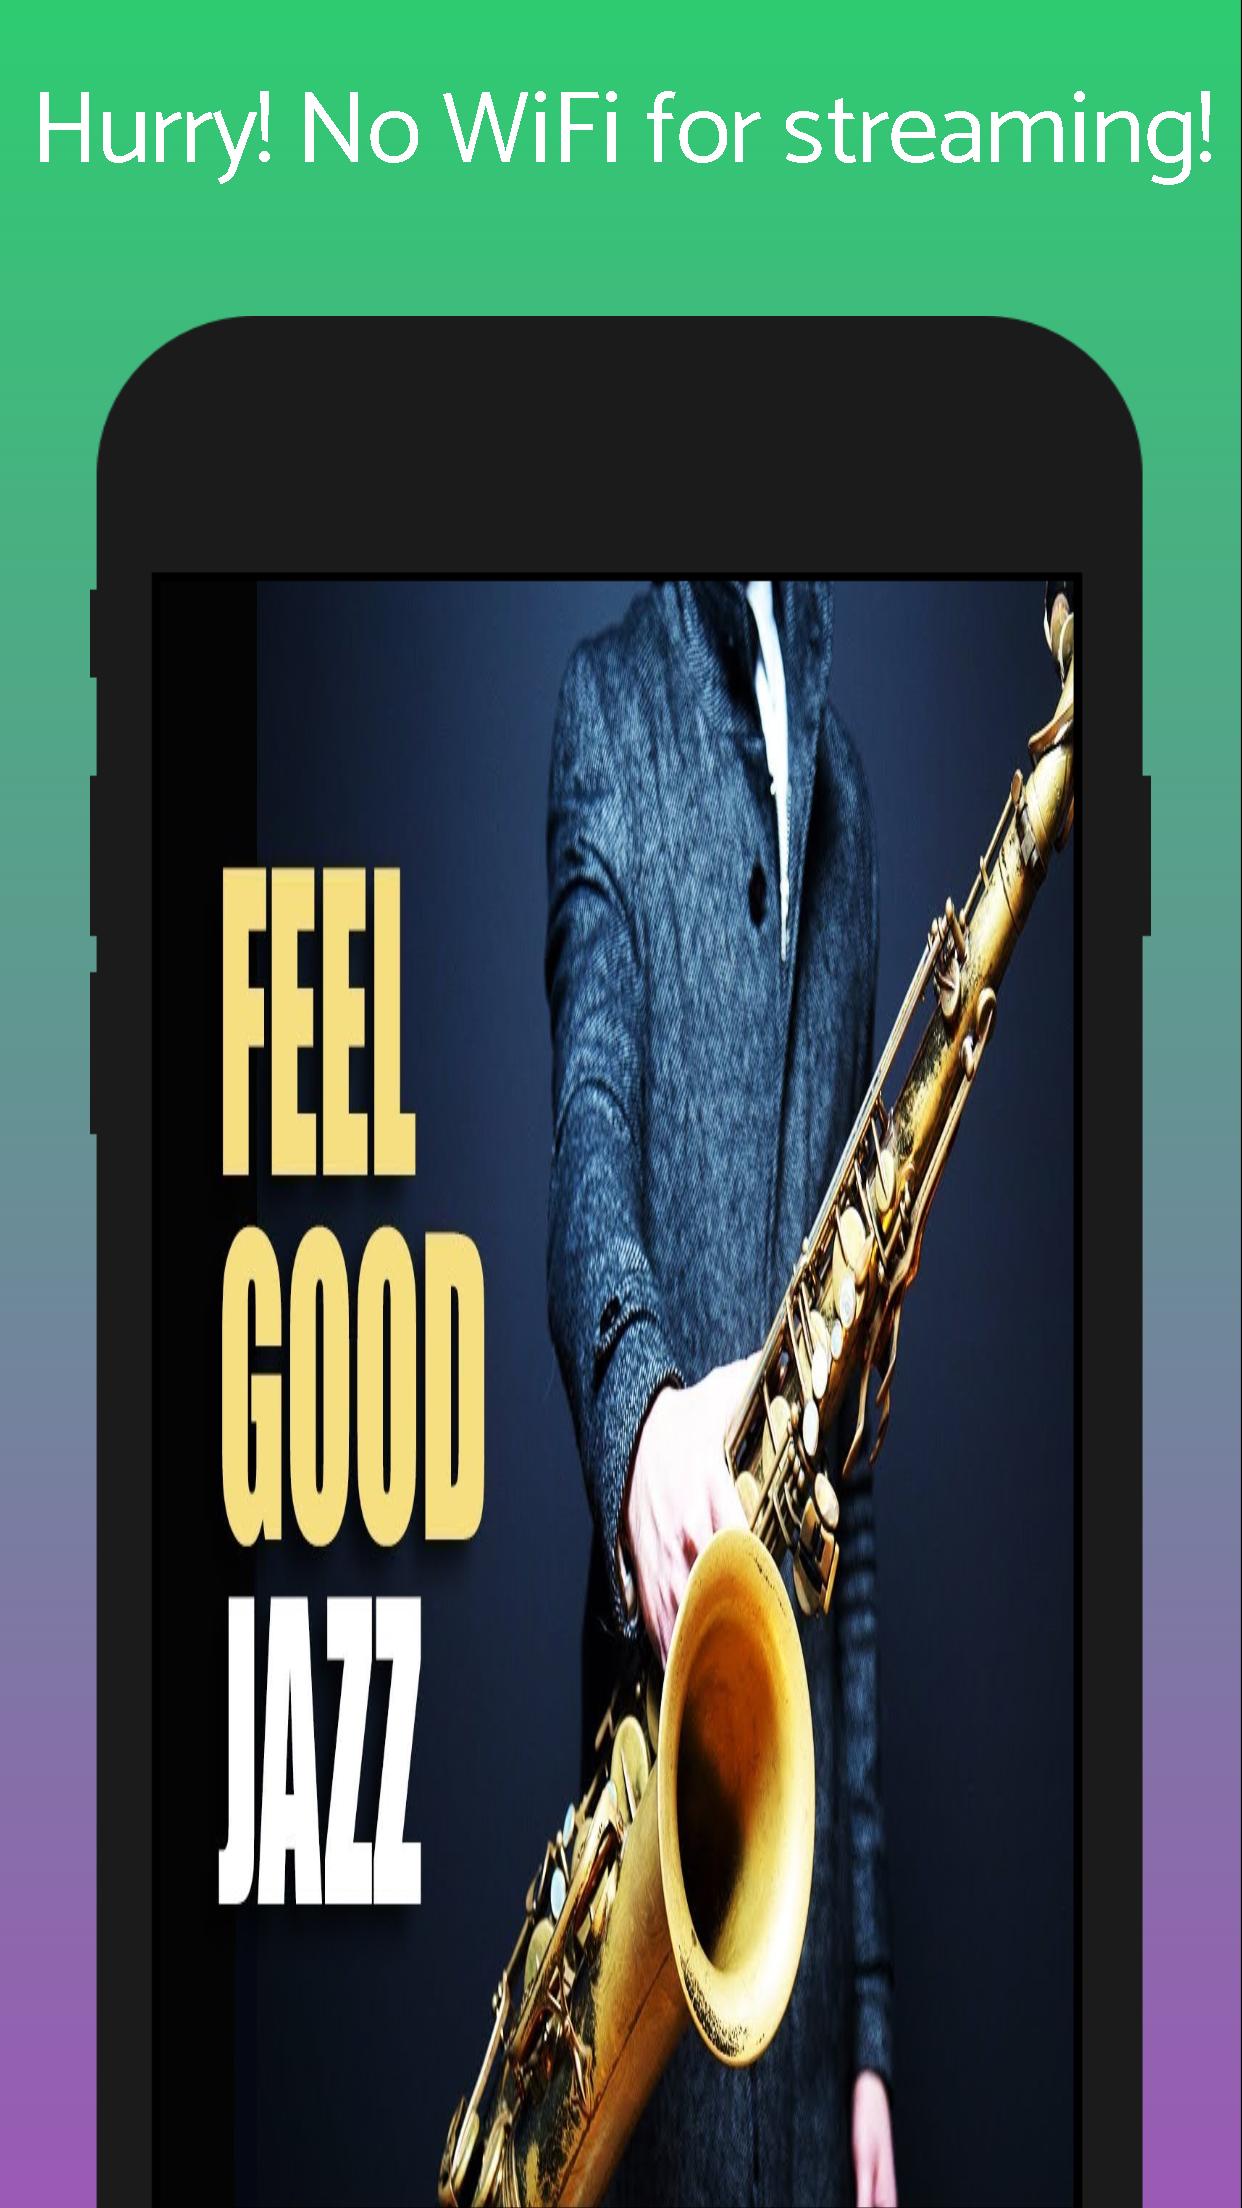 Jazz Music MP3 Songs Offline No Internet No WiFi for Android - APK Download